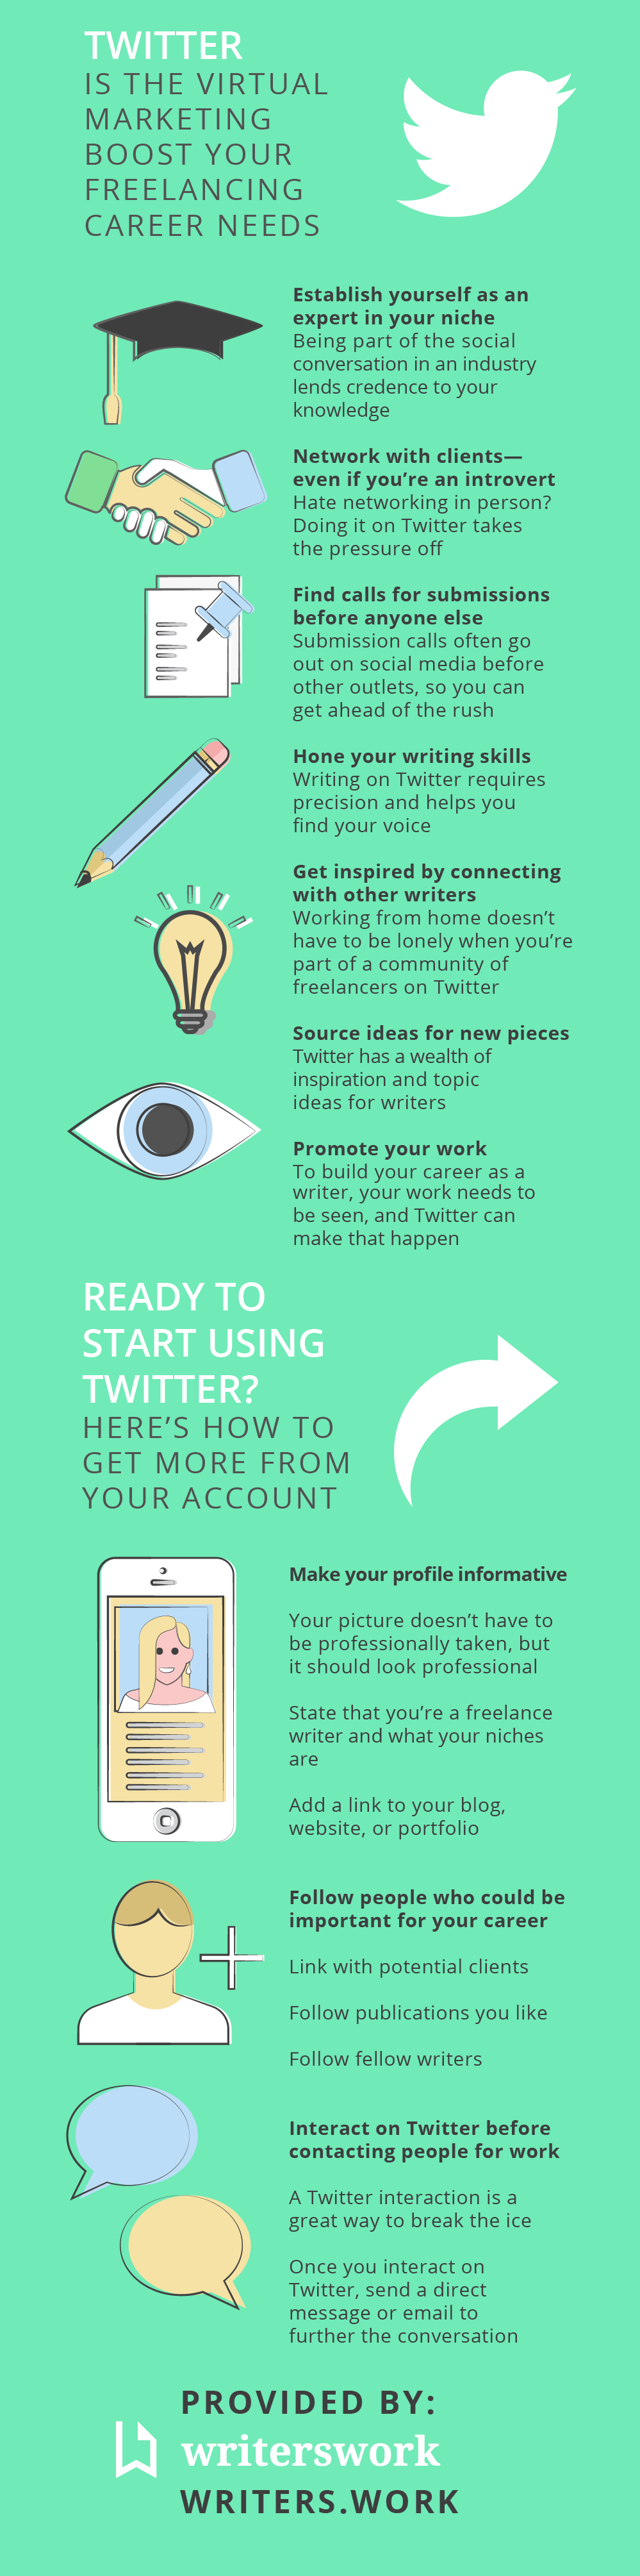 Tips for using Twitter to enhance your freelance writing career.